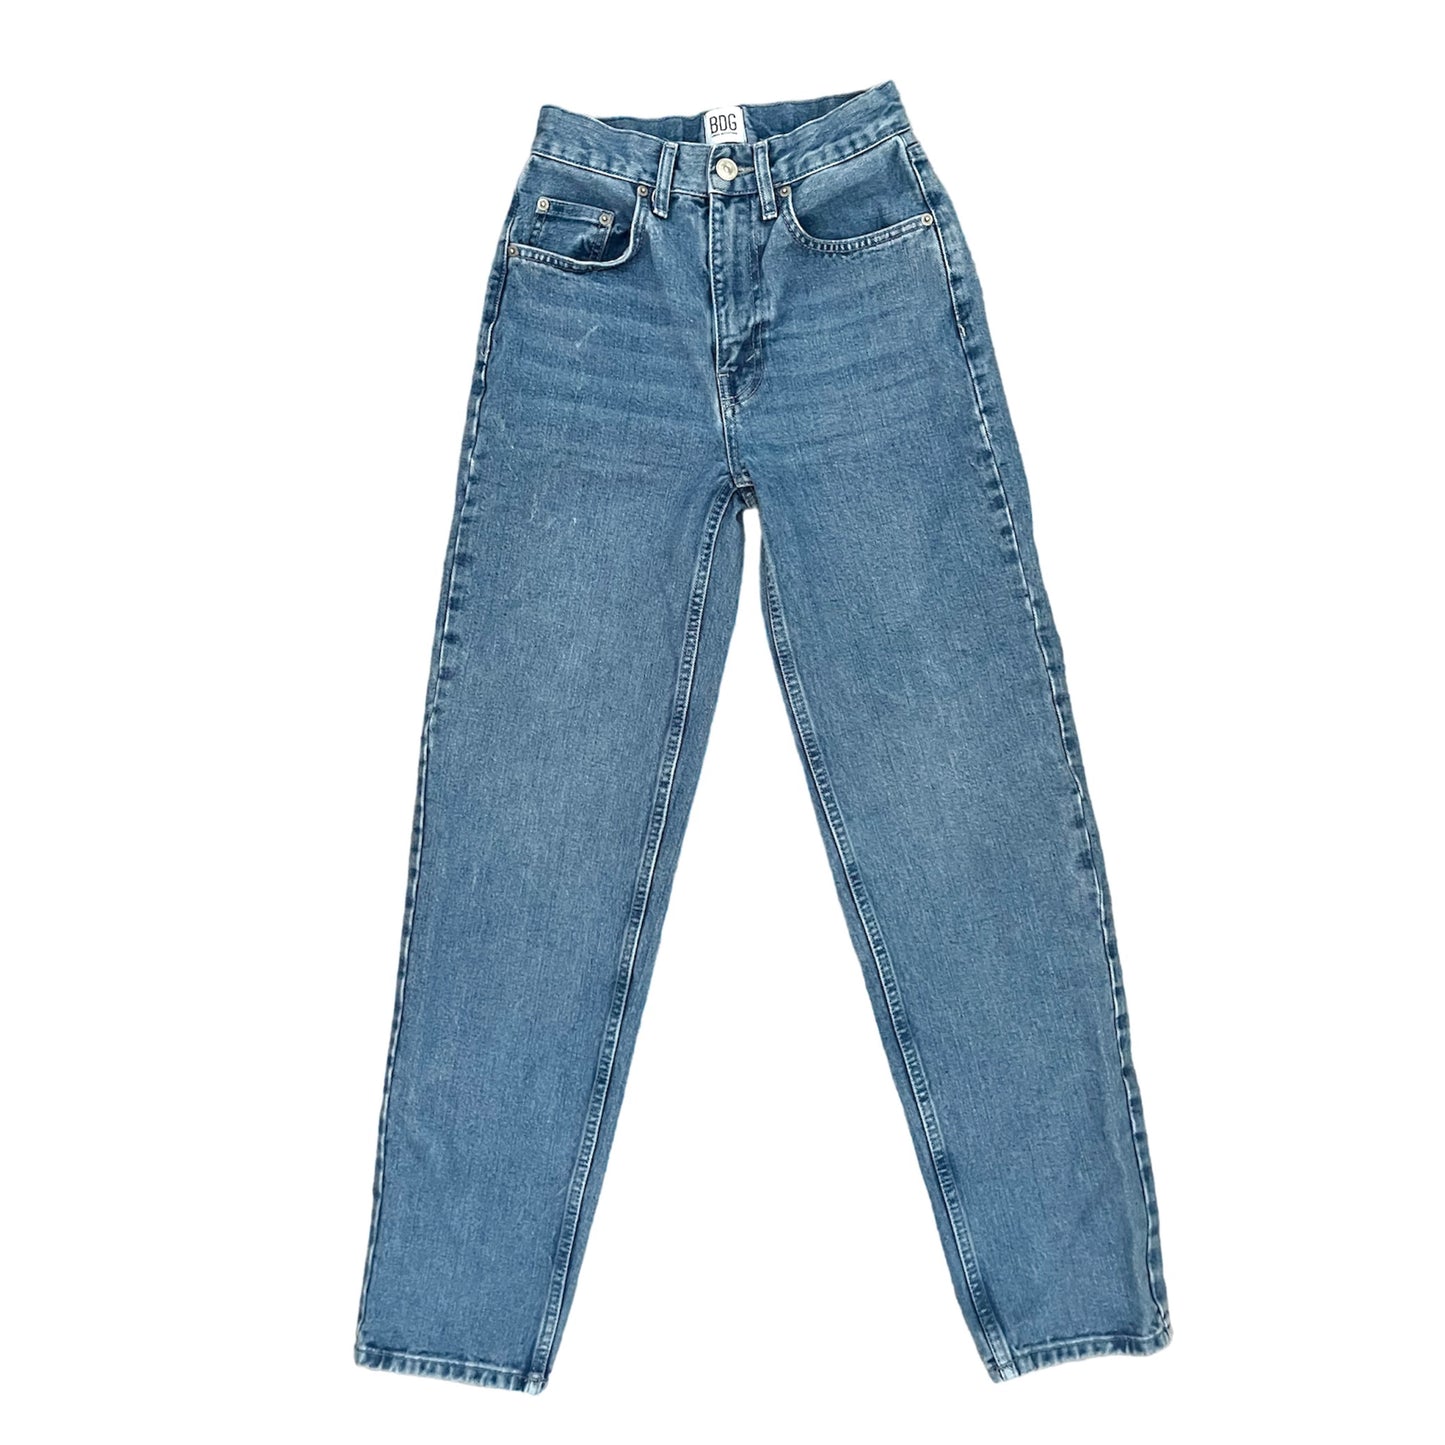 BDG urban outfitters high rise baggy medium wash jeans